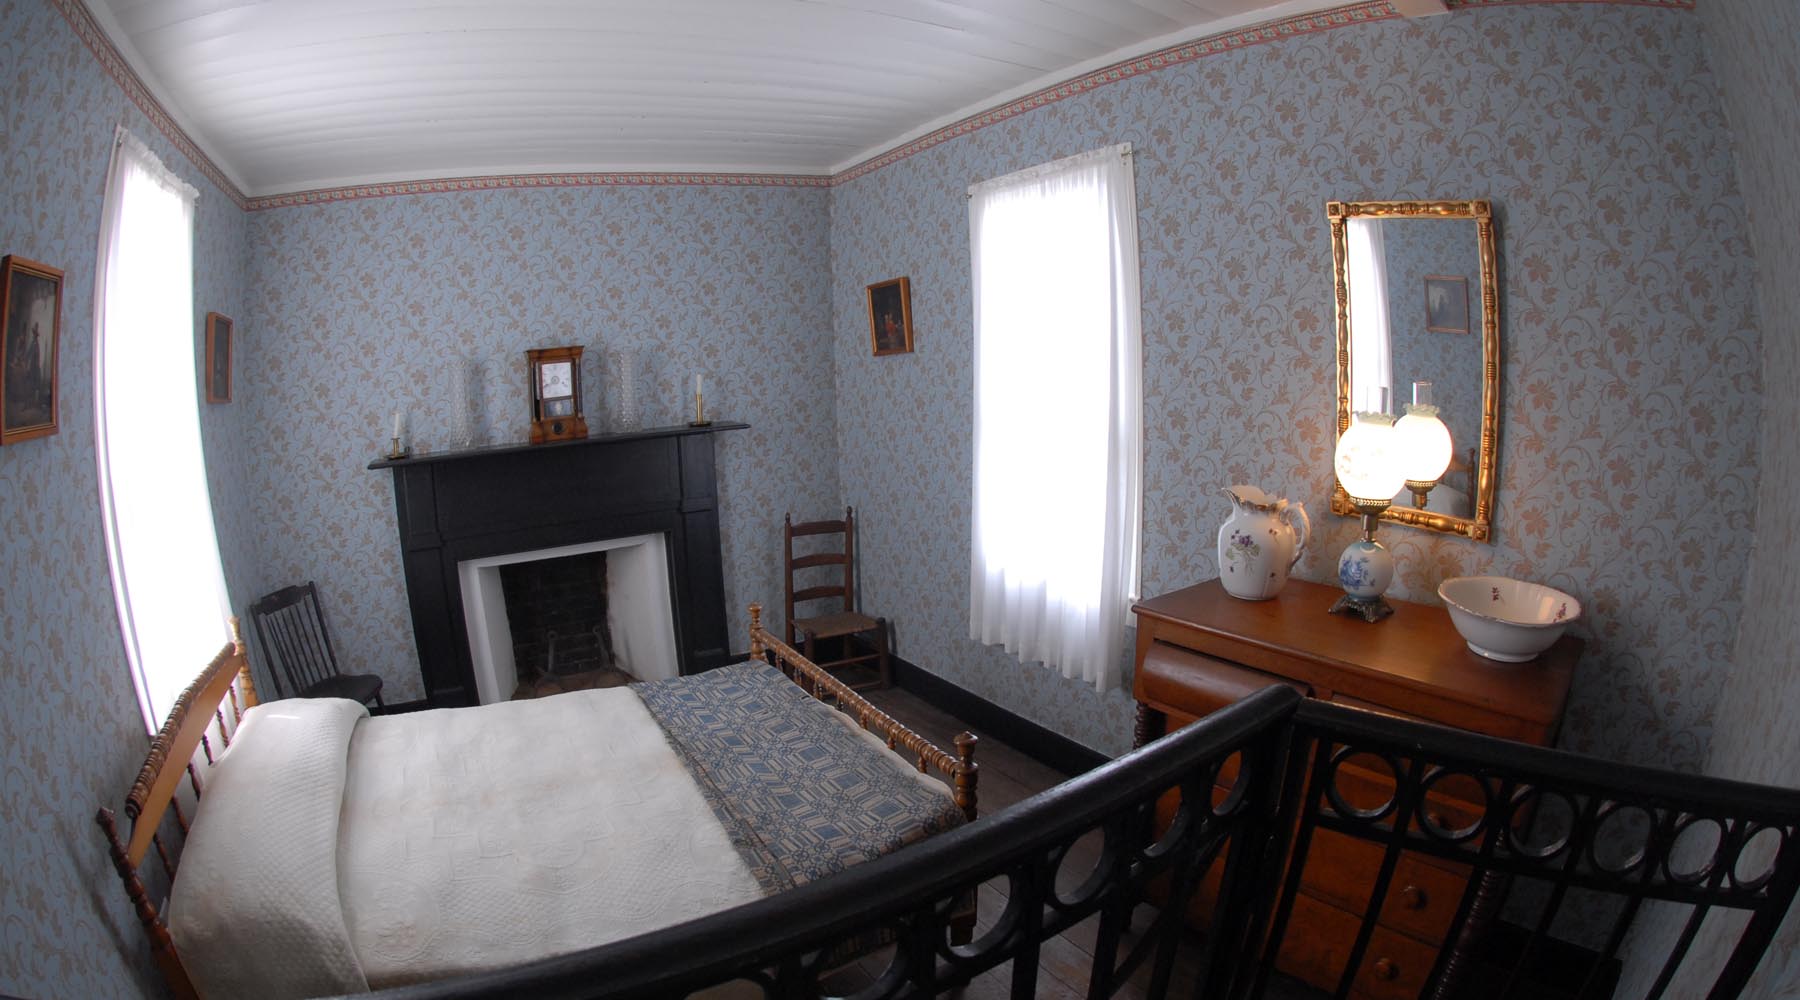 The North Bedroom